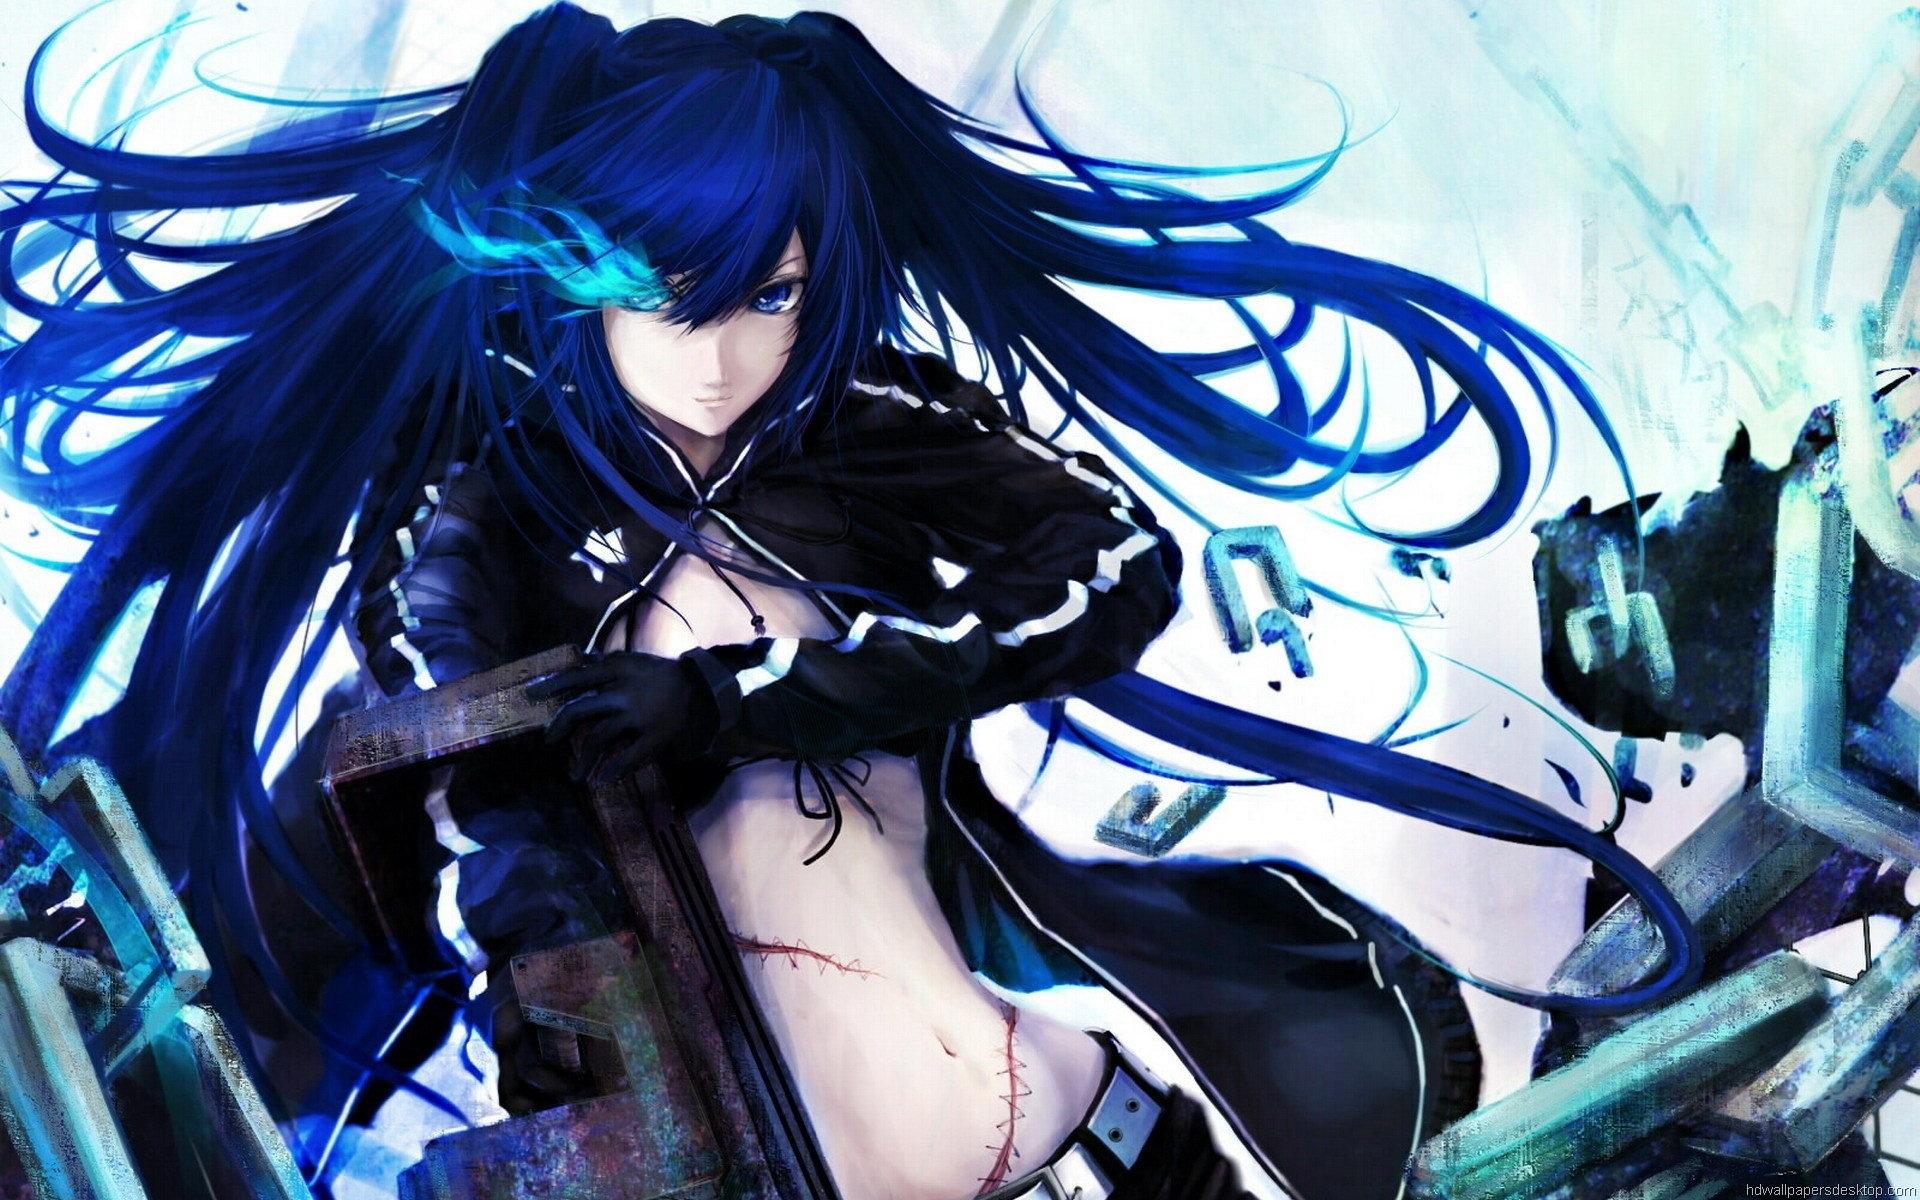 Cool Anime Girl Pictures Wallpapers - Wallpaper Cave